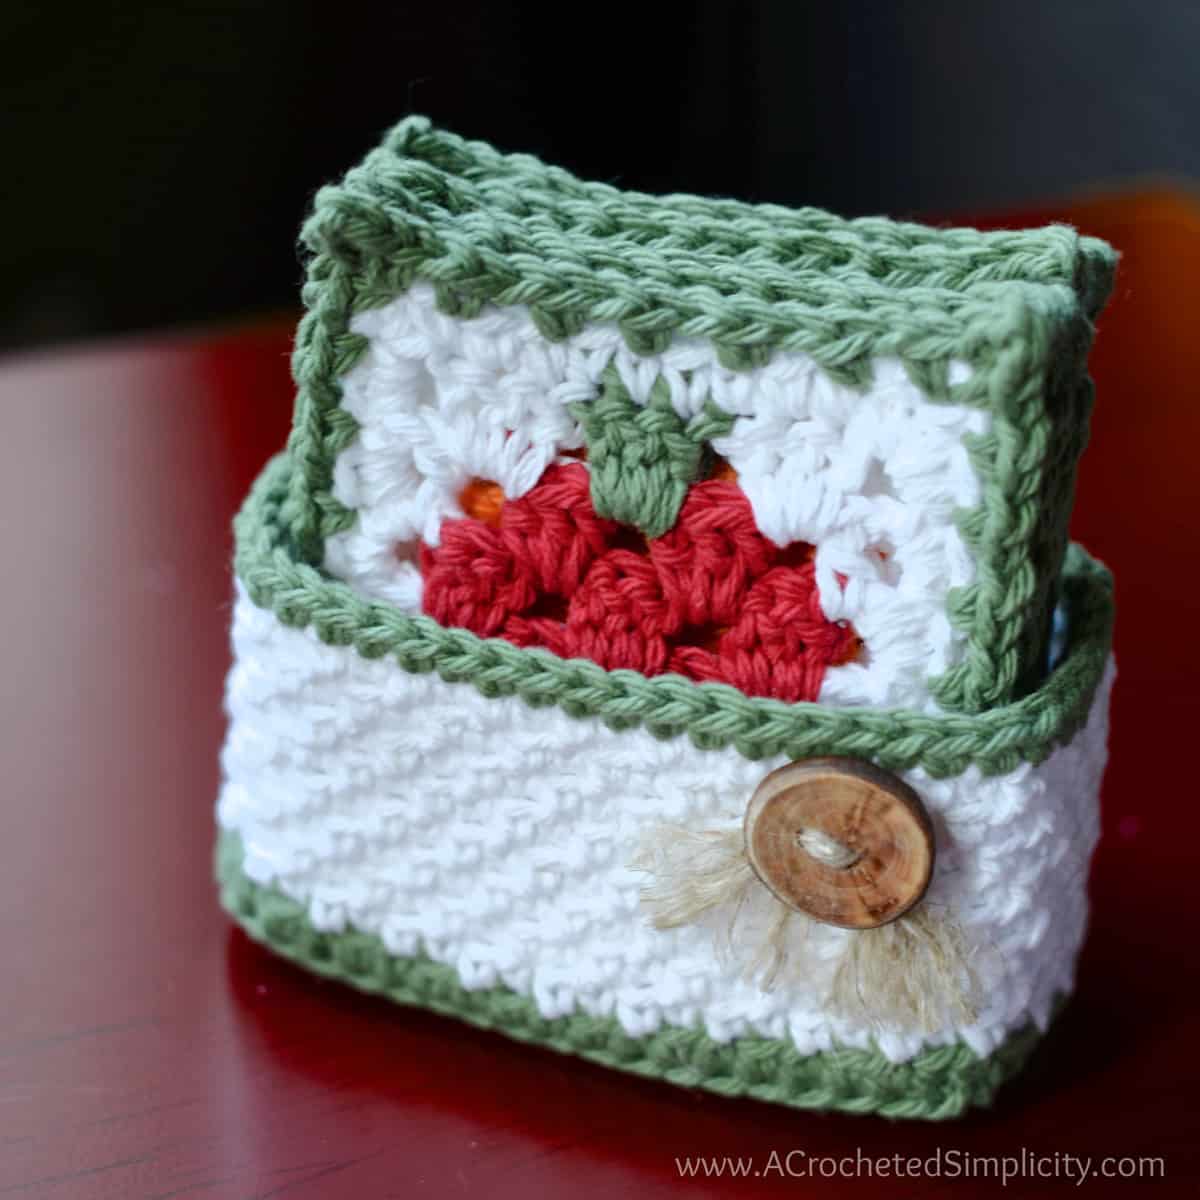 Apple crochet coaster set with holder sitting on red table